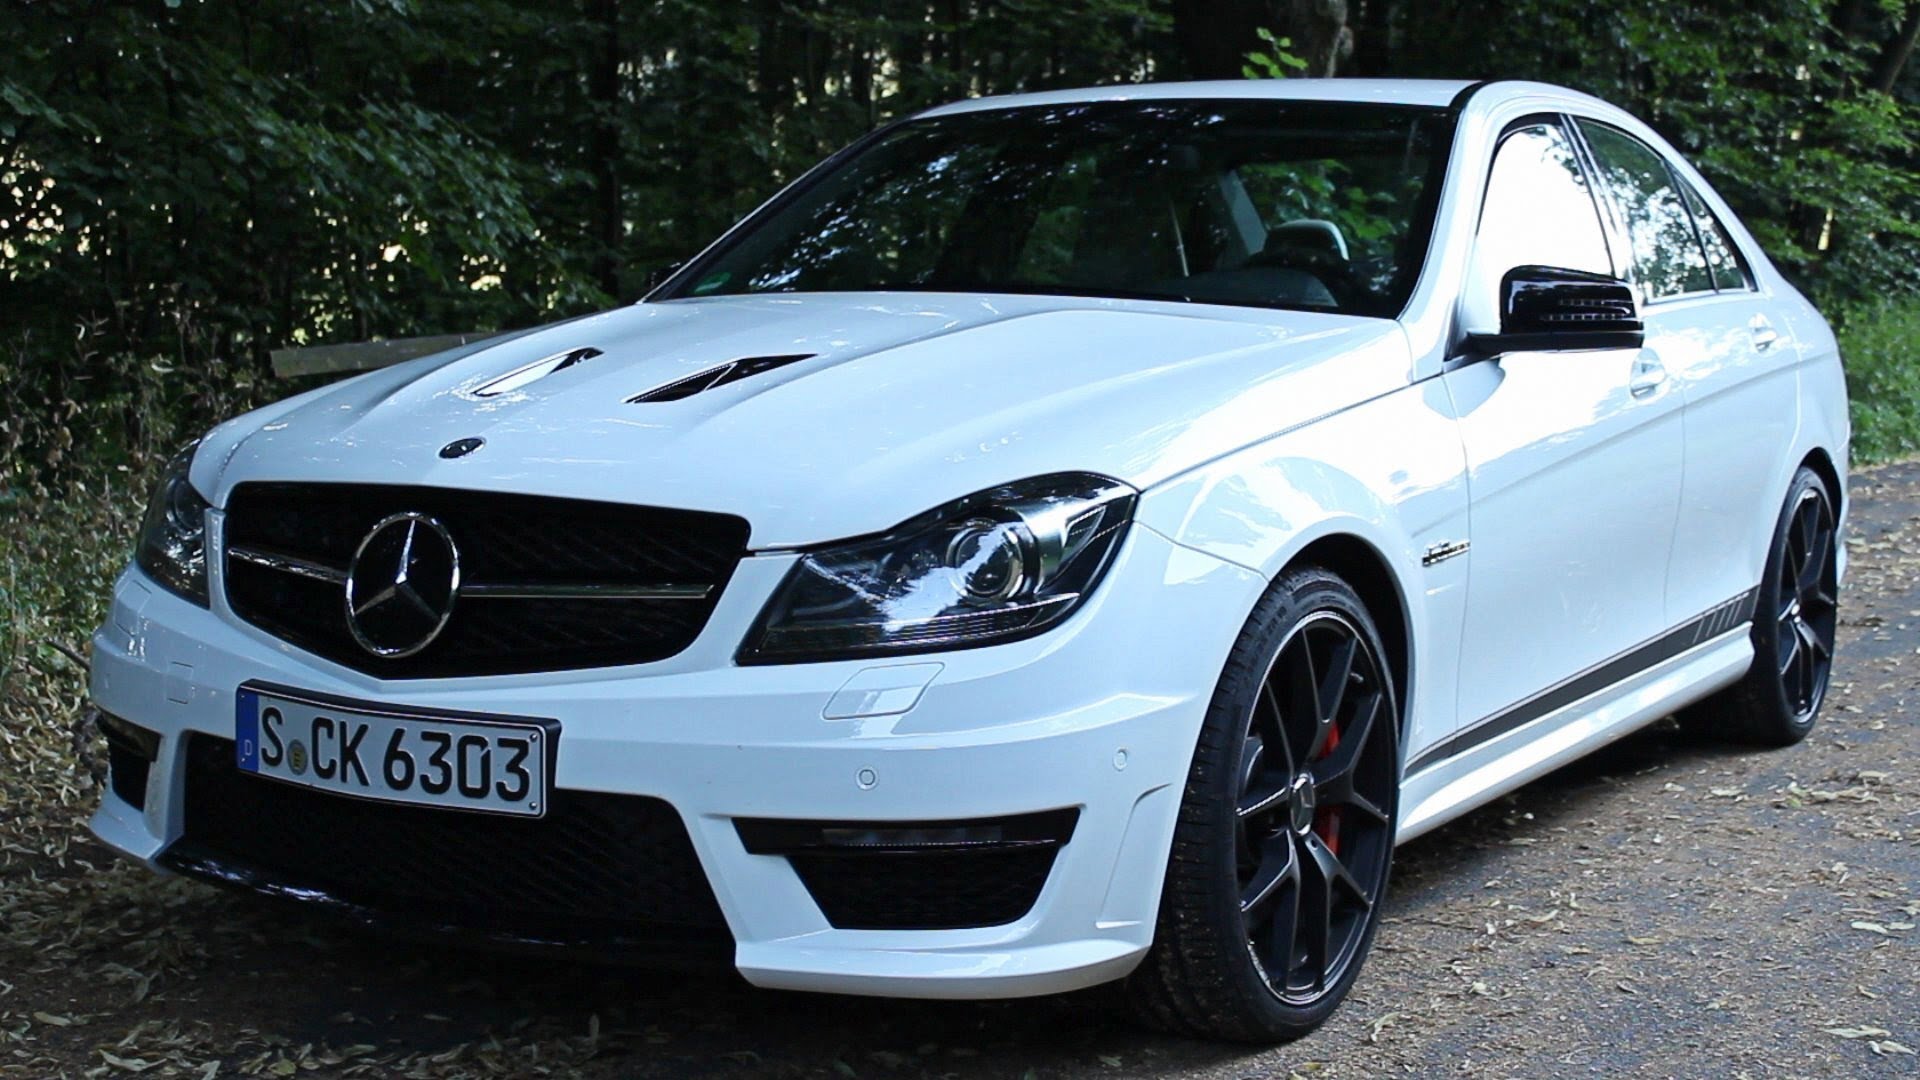 HQ Mercedes Benz C63 Amg Wallpapers | File 287.5Kb